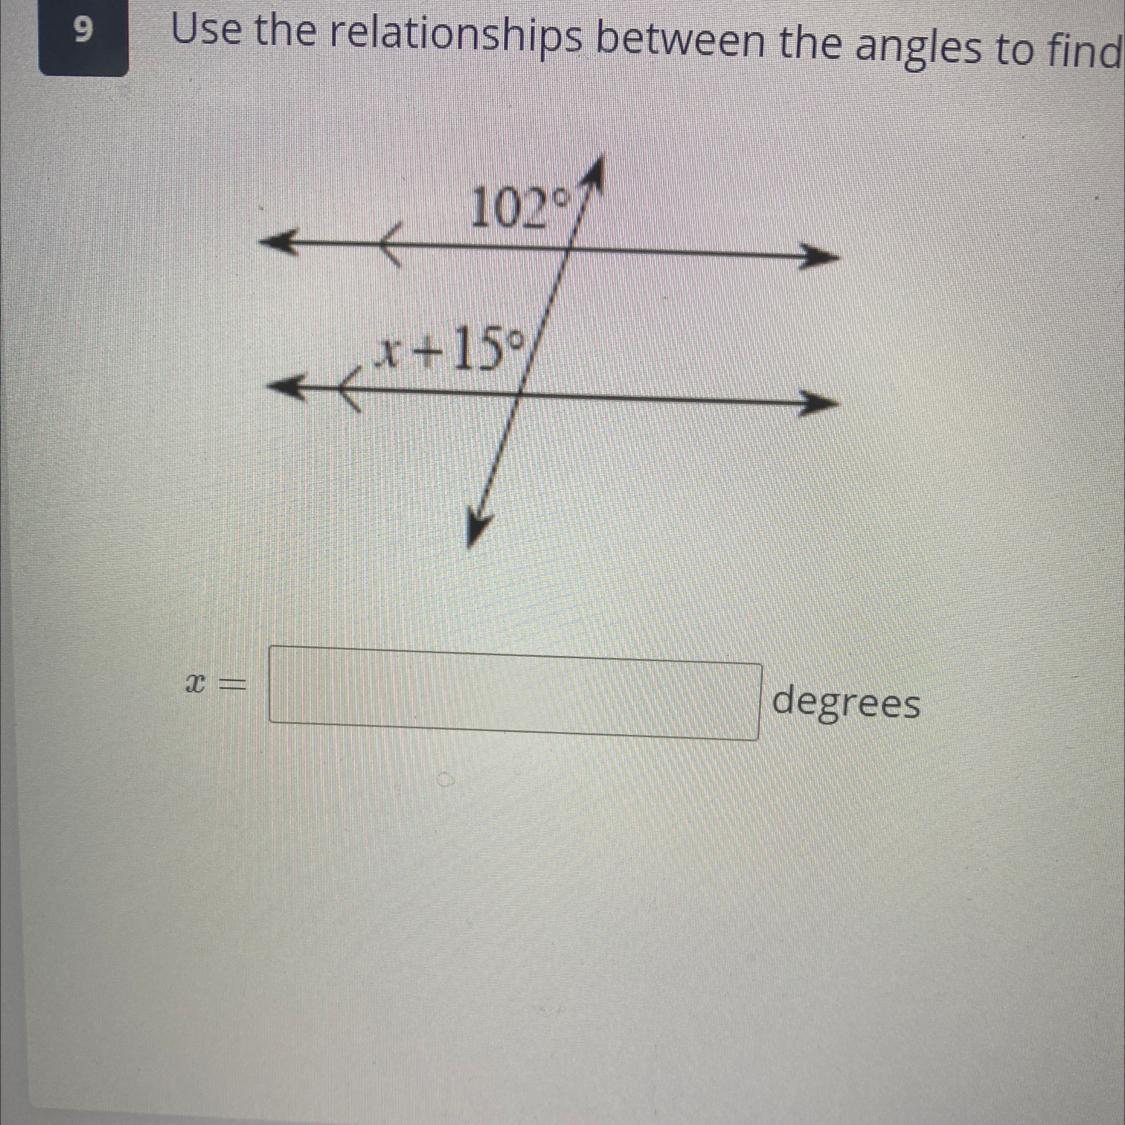 Use The Relationships Between The Angles To Find The Value Of X. 